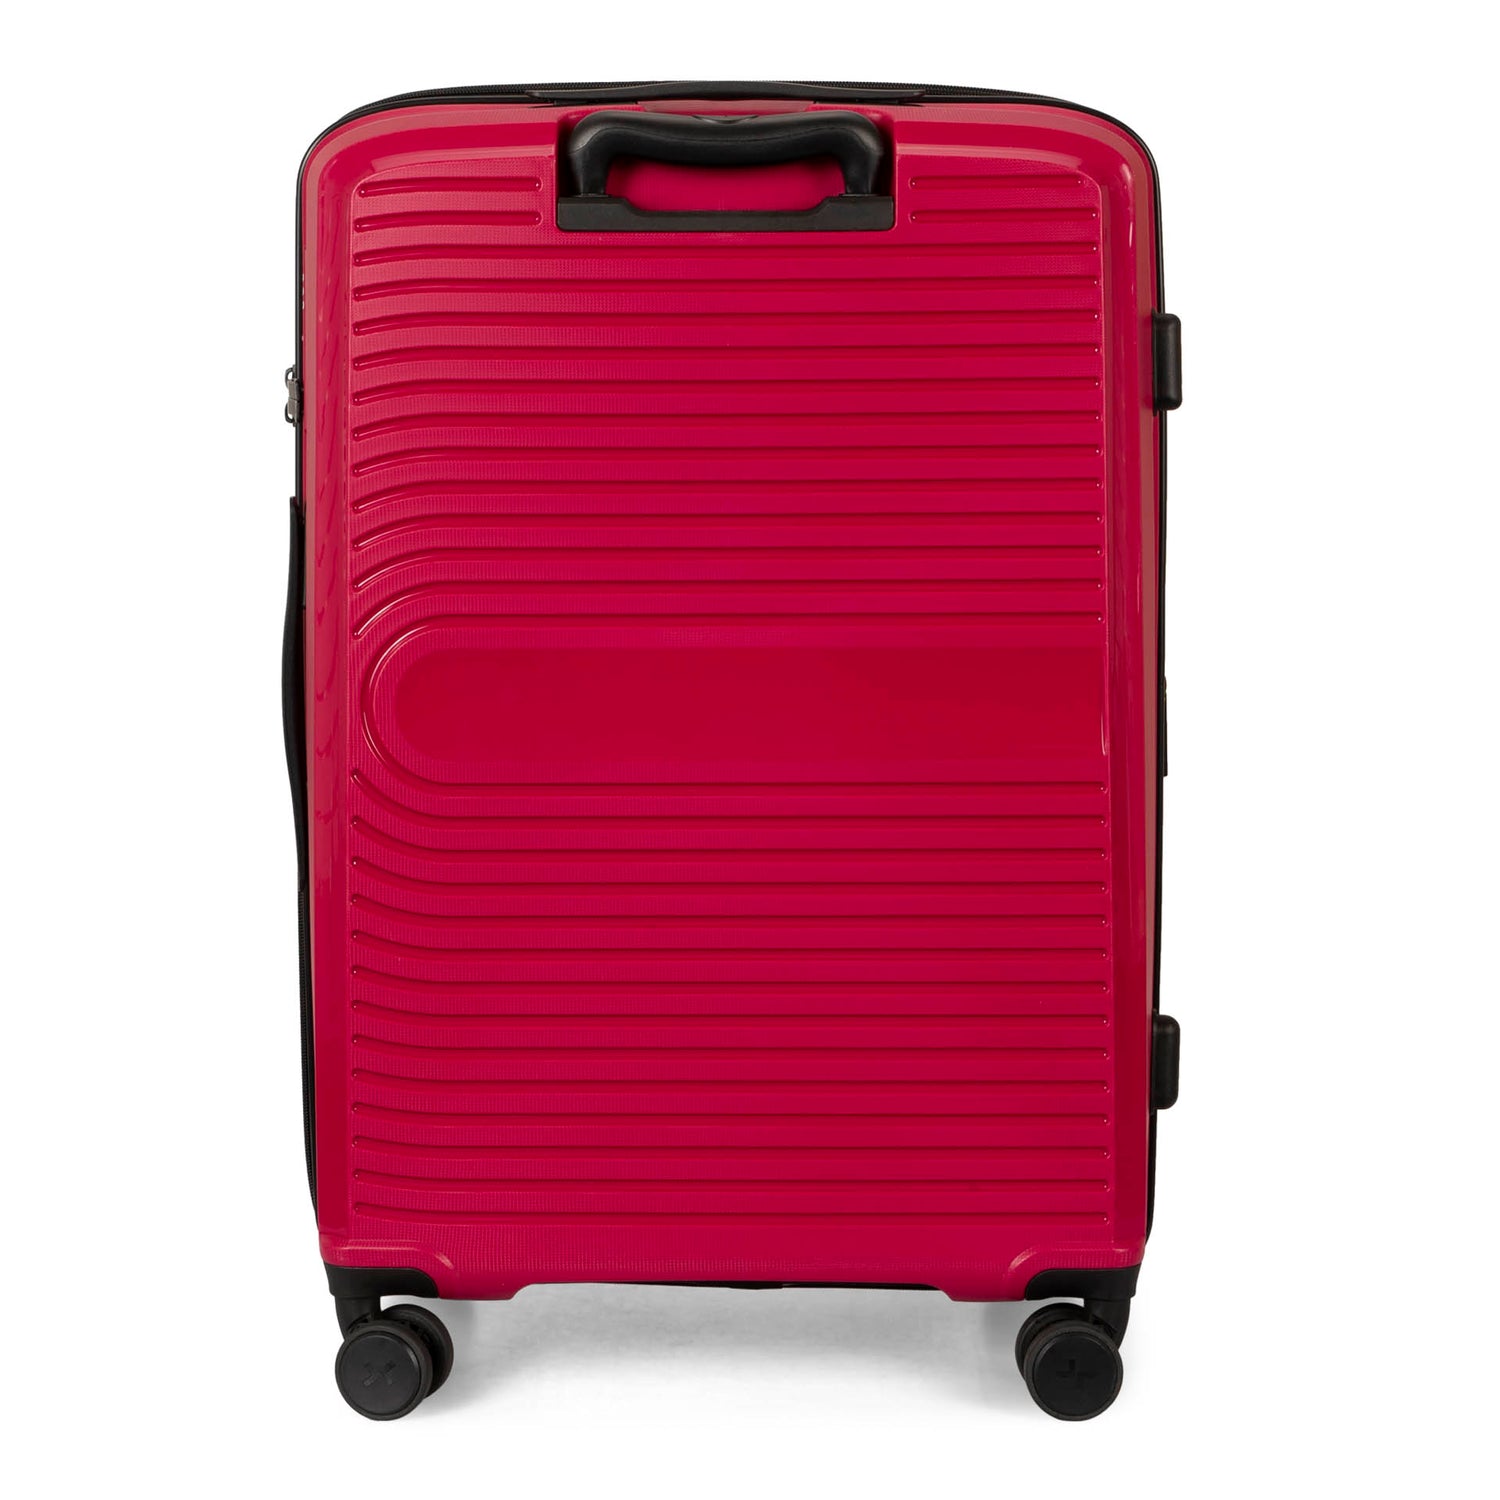 Back side of a red luggage called Dynamo designed by Tracker showing its telescopic handle and lined-pattern shell.